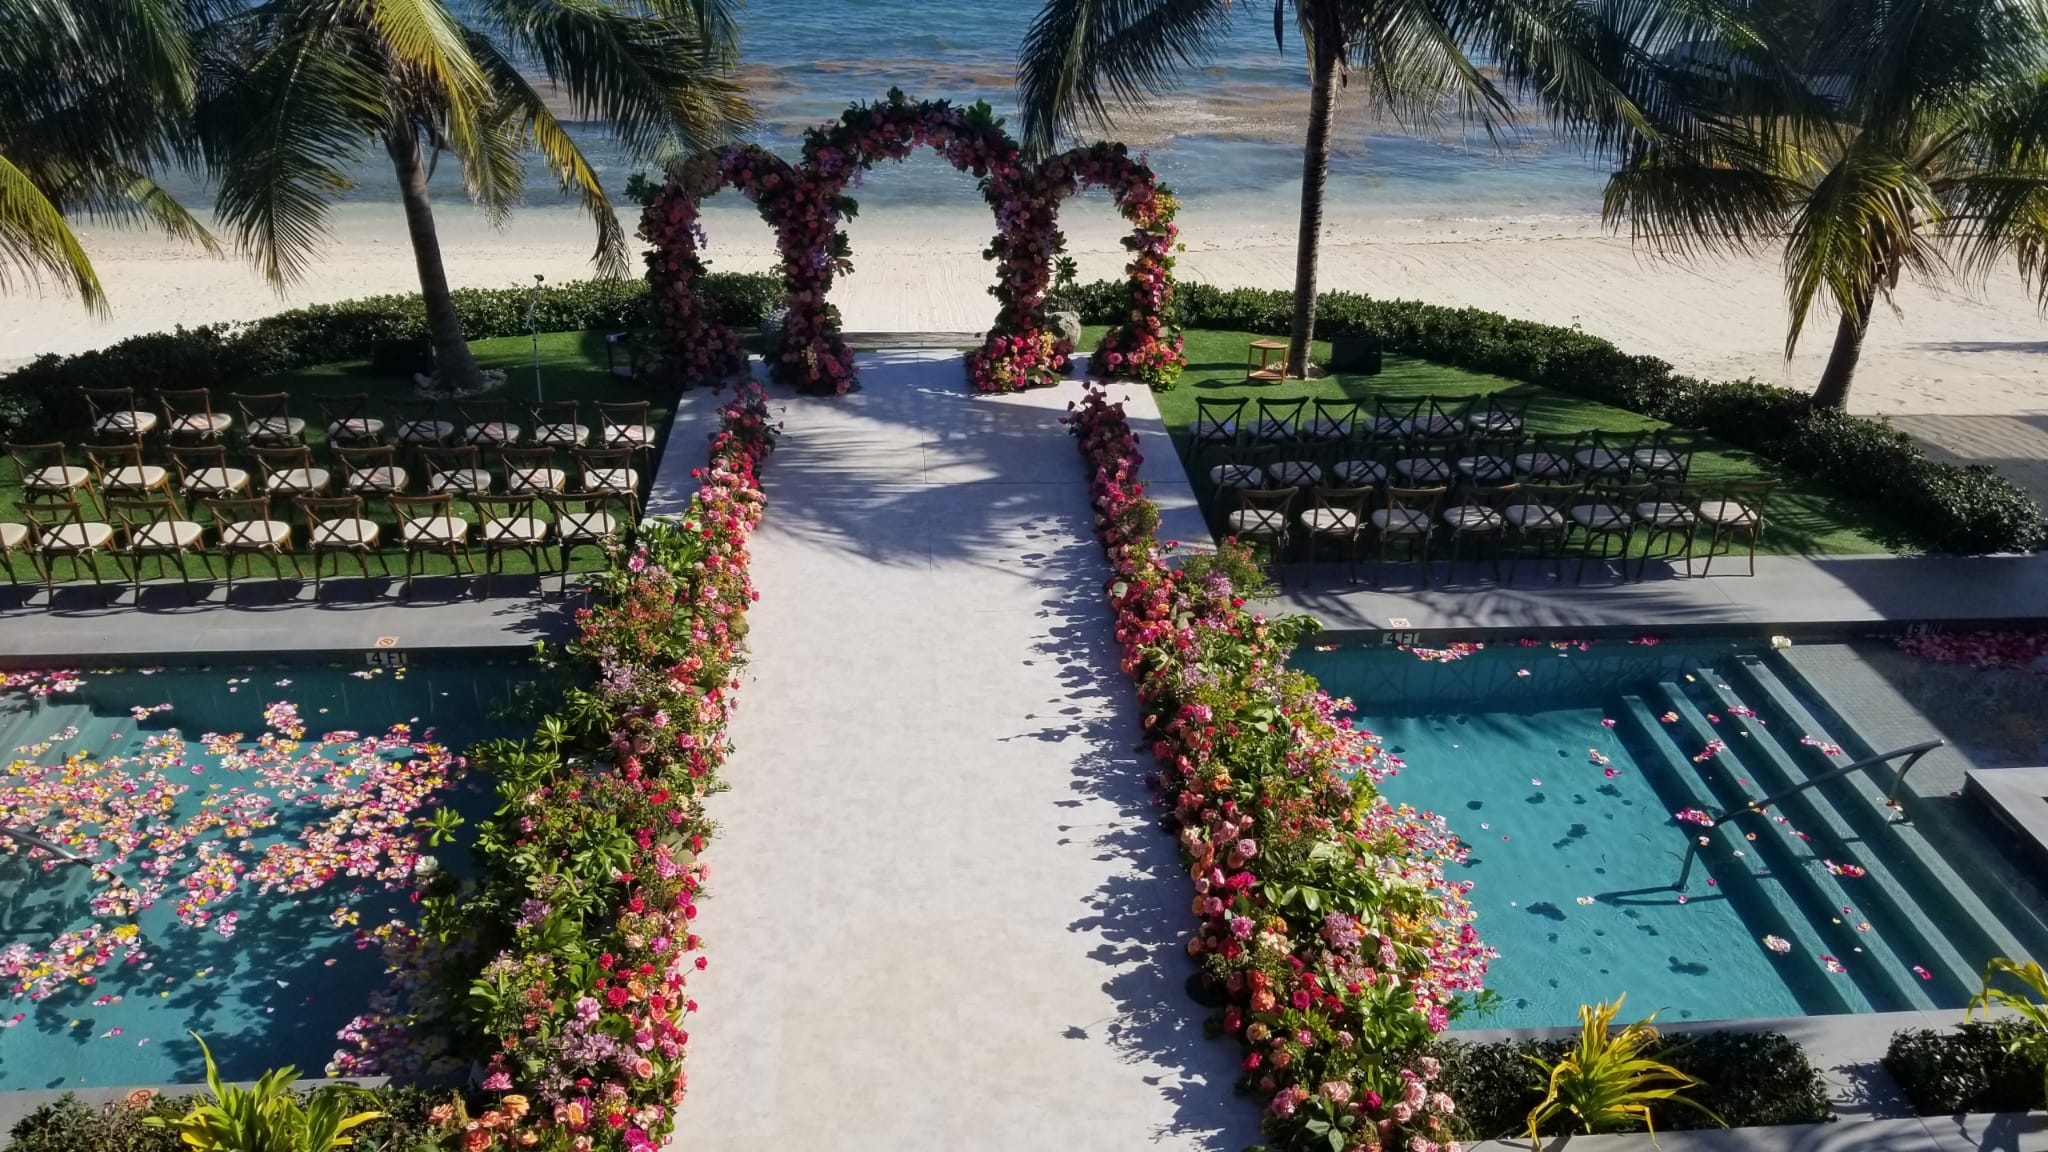 Colorful outdoor wedding ceremony setup with three vibrant arches.